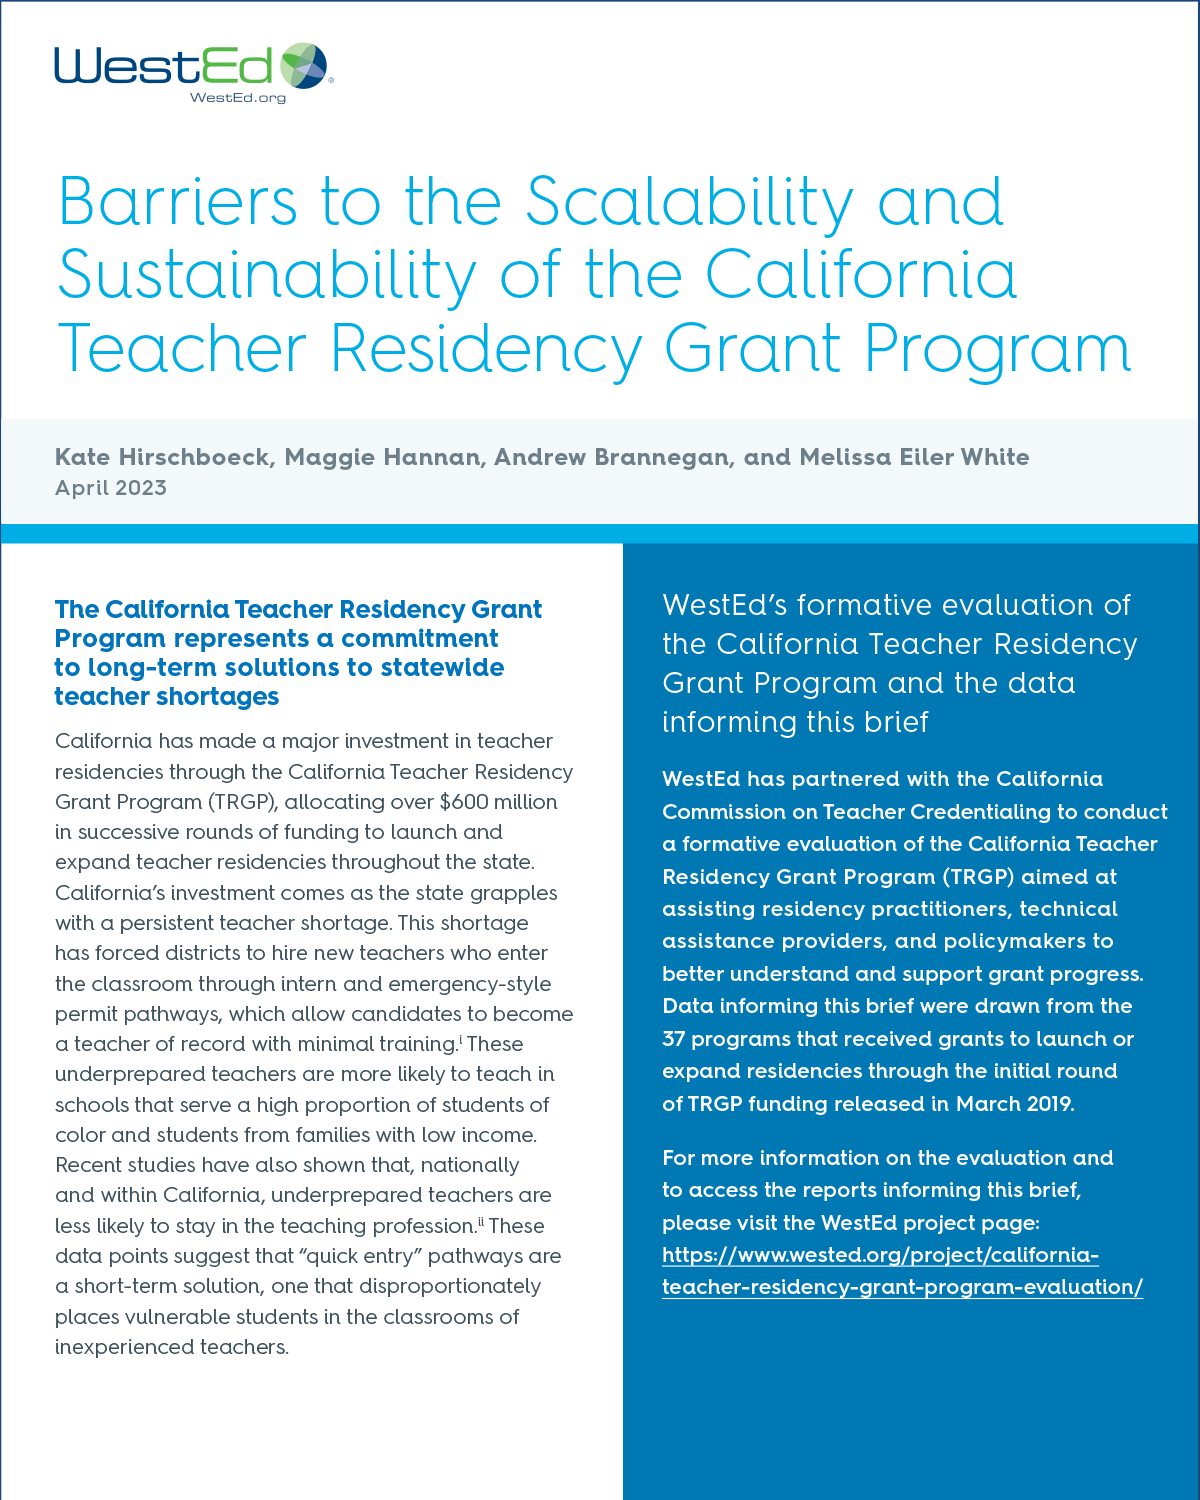 Barriers to the Scalability and Sustainability of the California Teacher Residency Grant Program